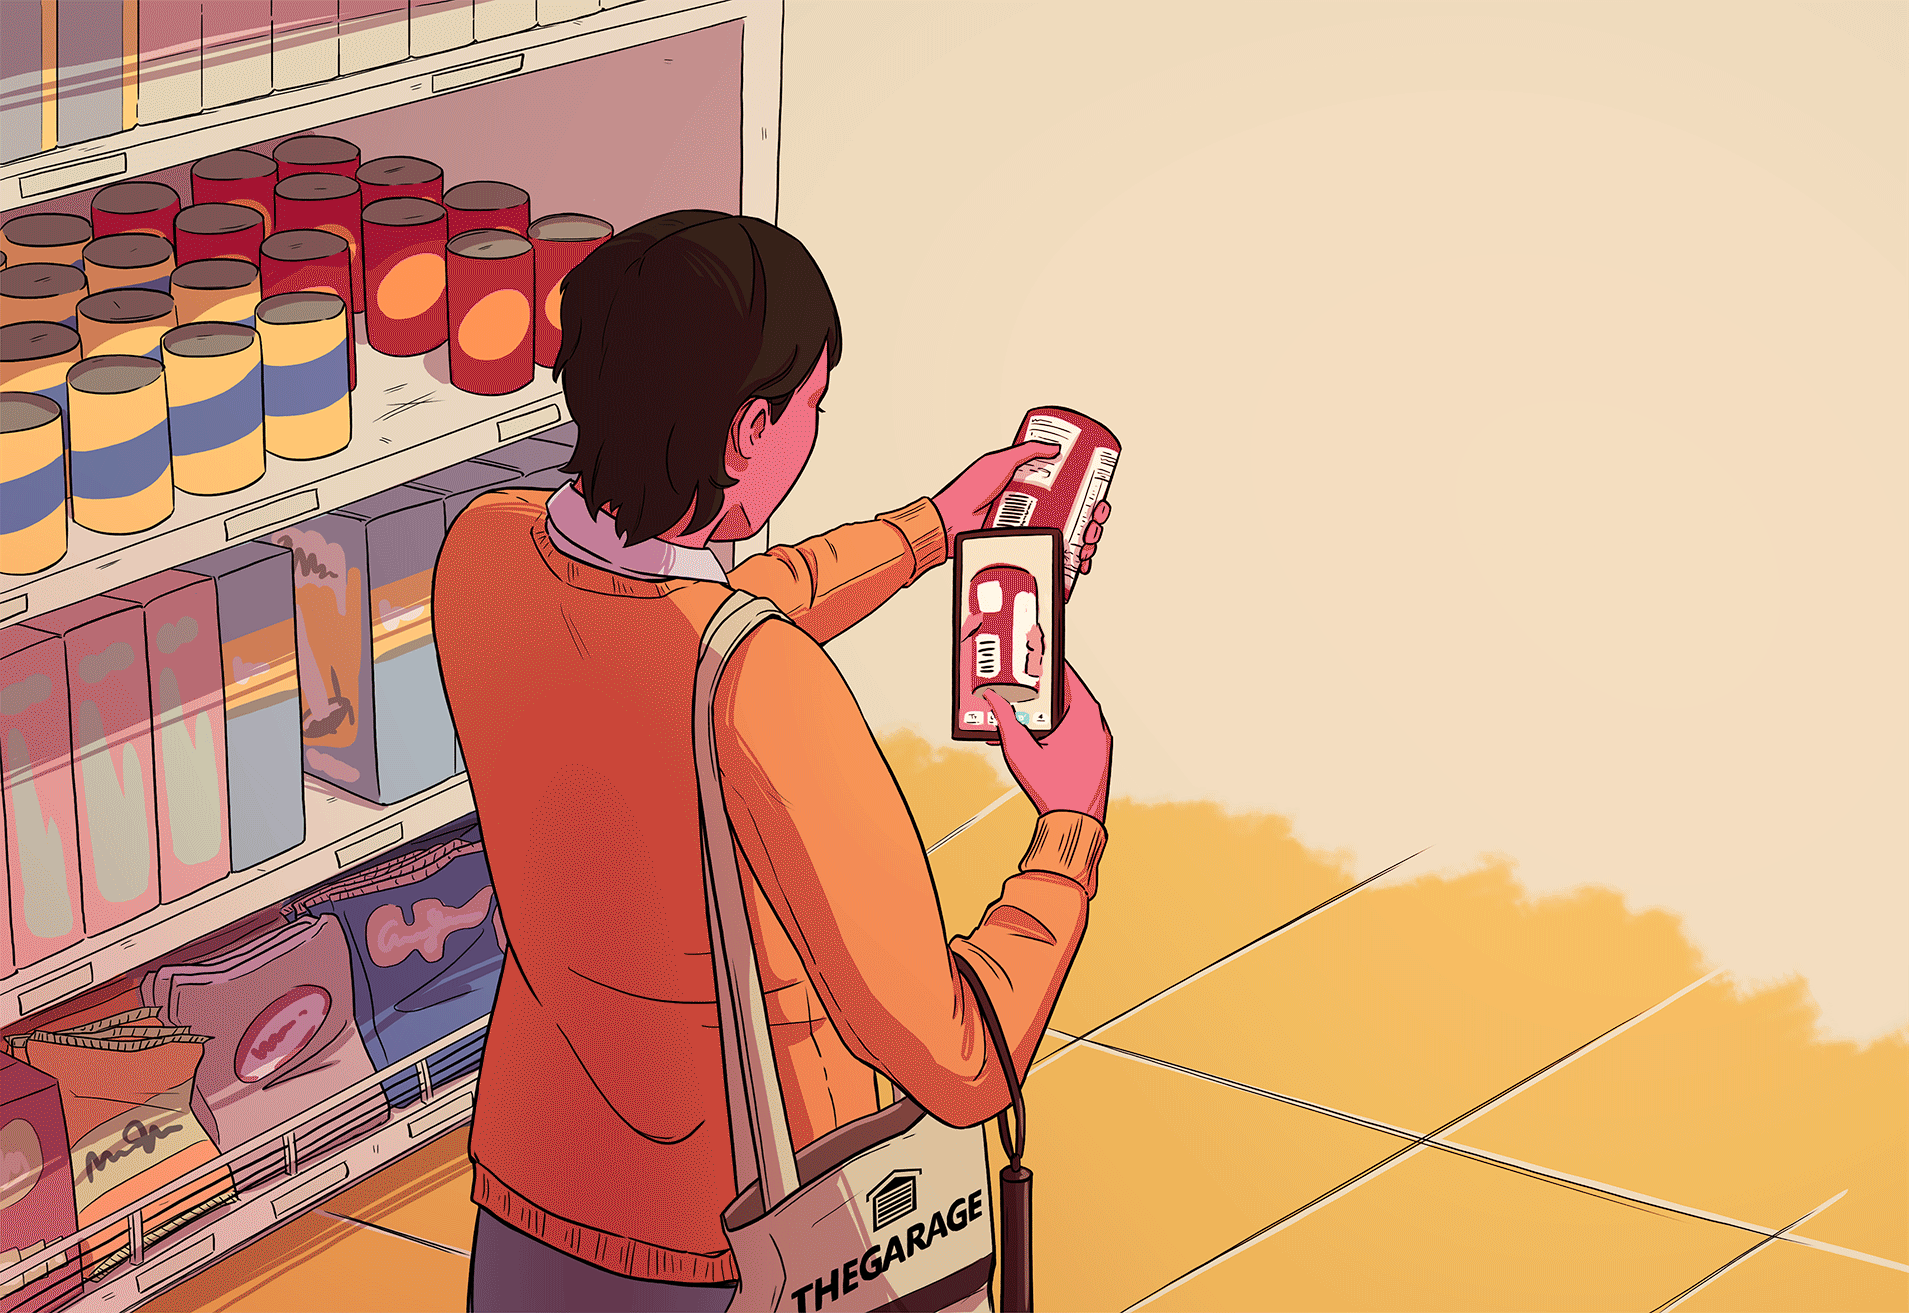 Illustration showing a woman in a grocery store aisle using a phone app to read the label on a soup can.